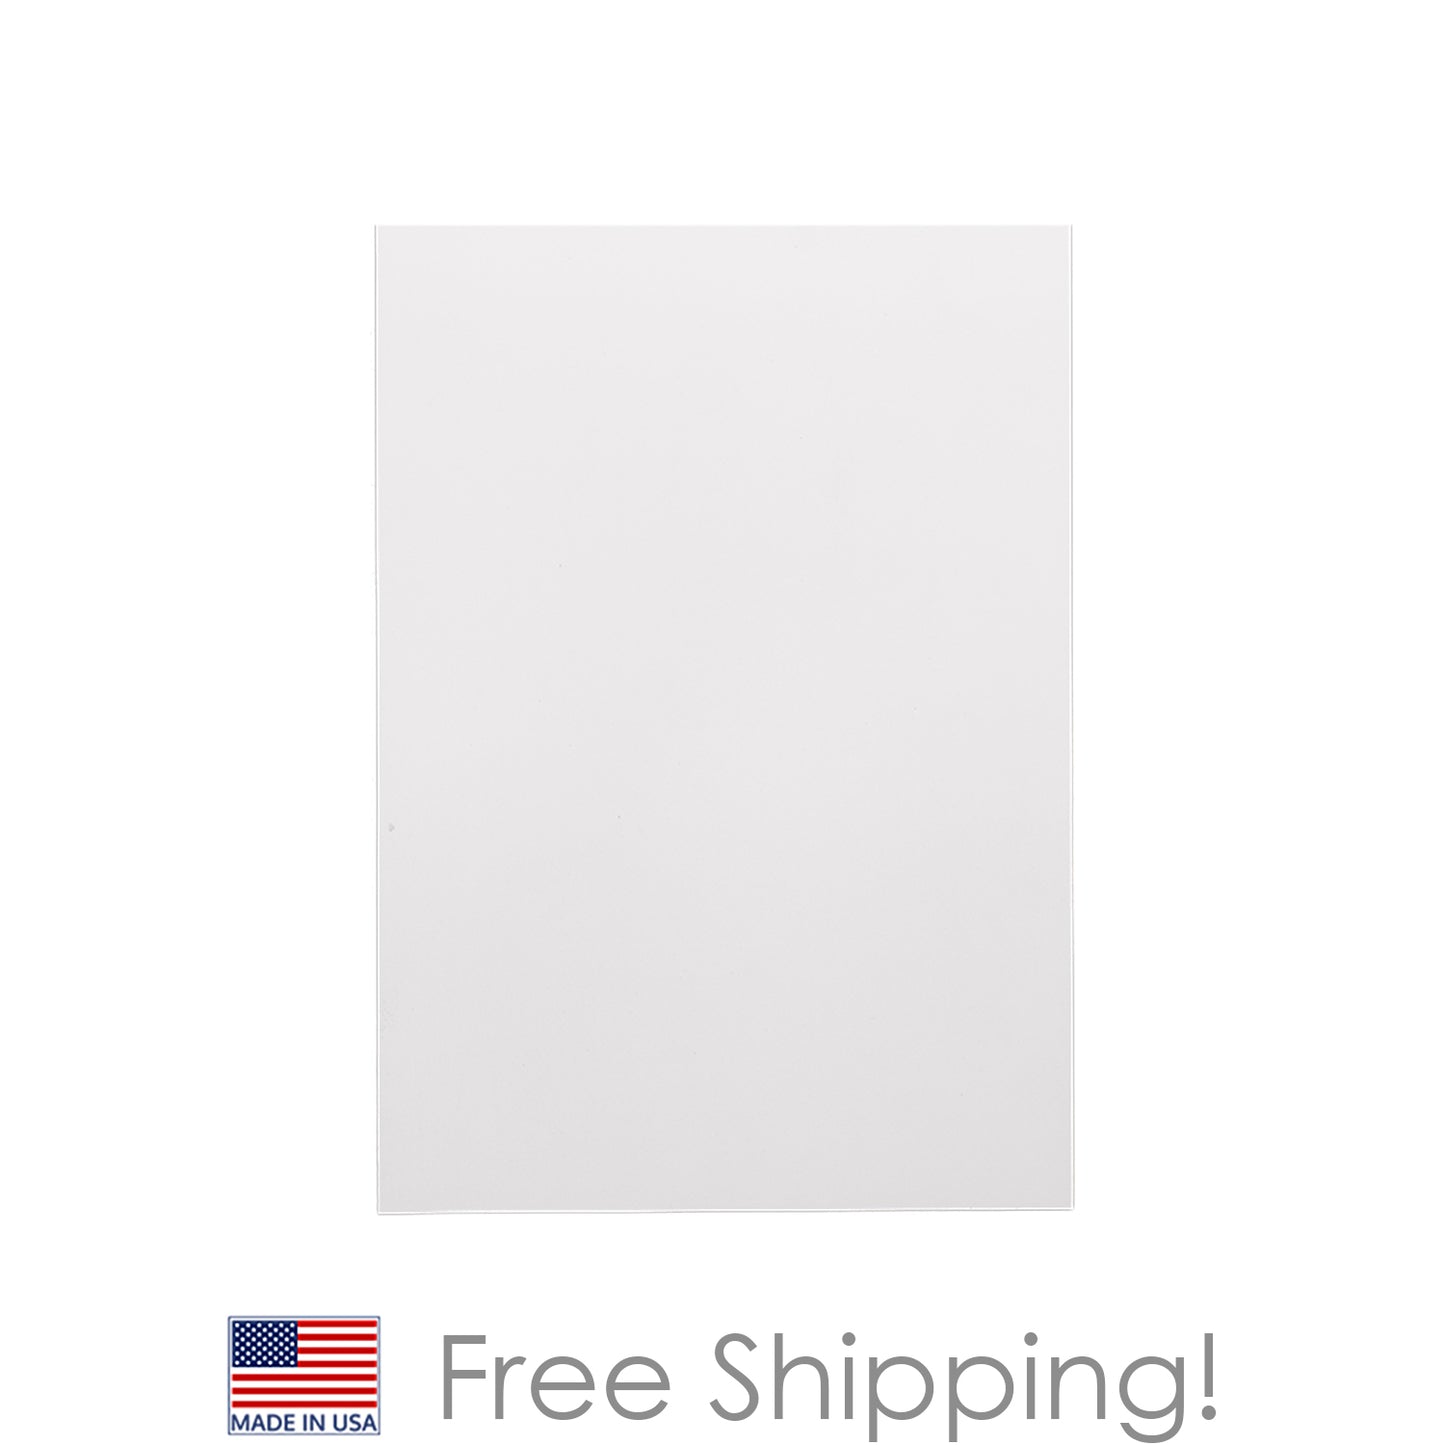 Quicklock RTA (Ready-to-Assemble) Pure White .25"X11.25"X18" End Panel